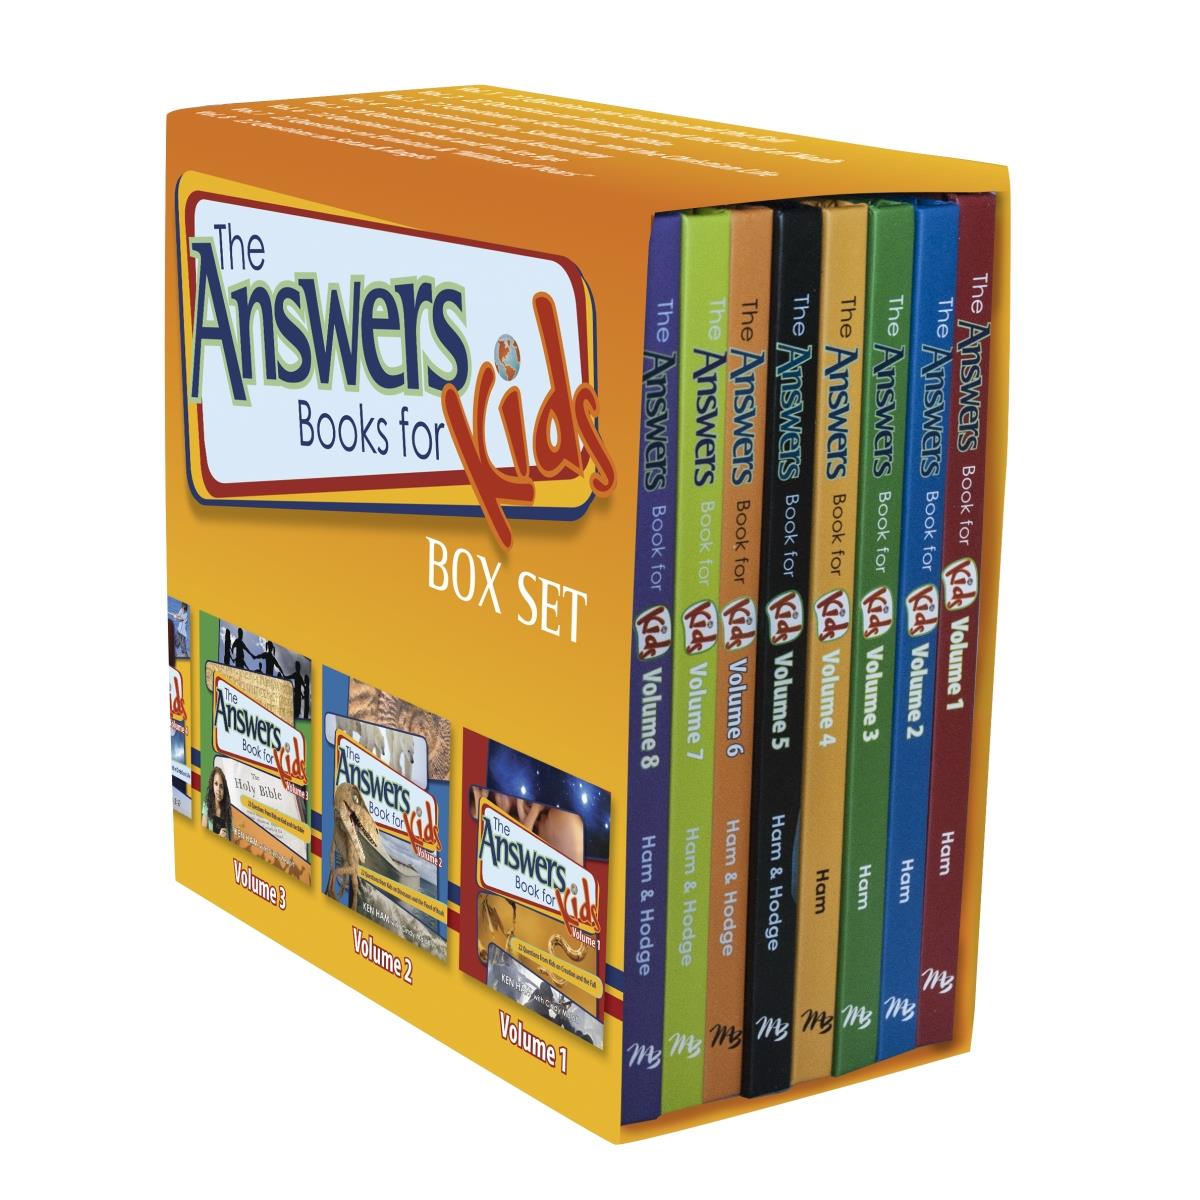 Master Books 152293 The Answers Book For Kids Boxed Set - Volume 1-8